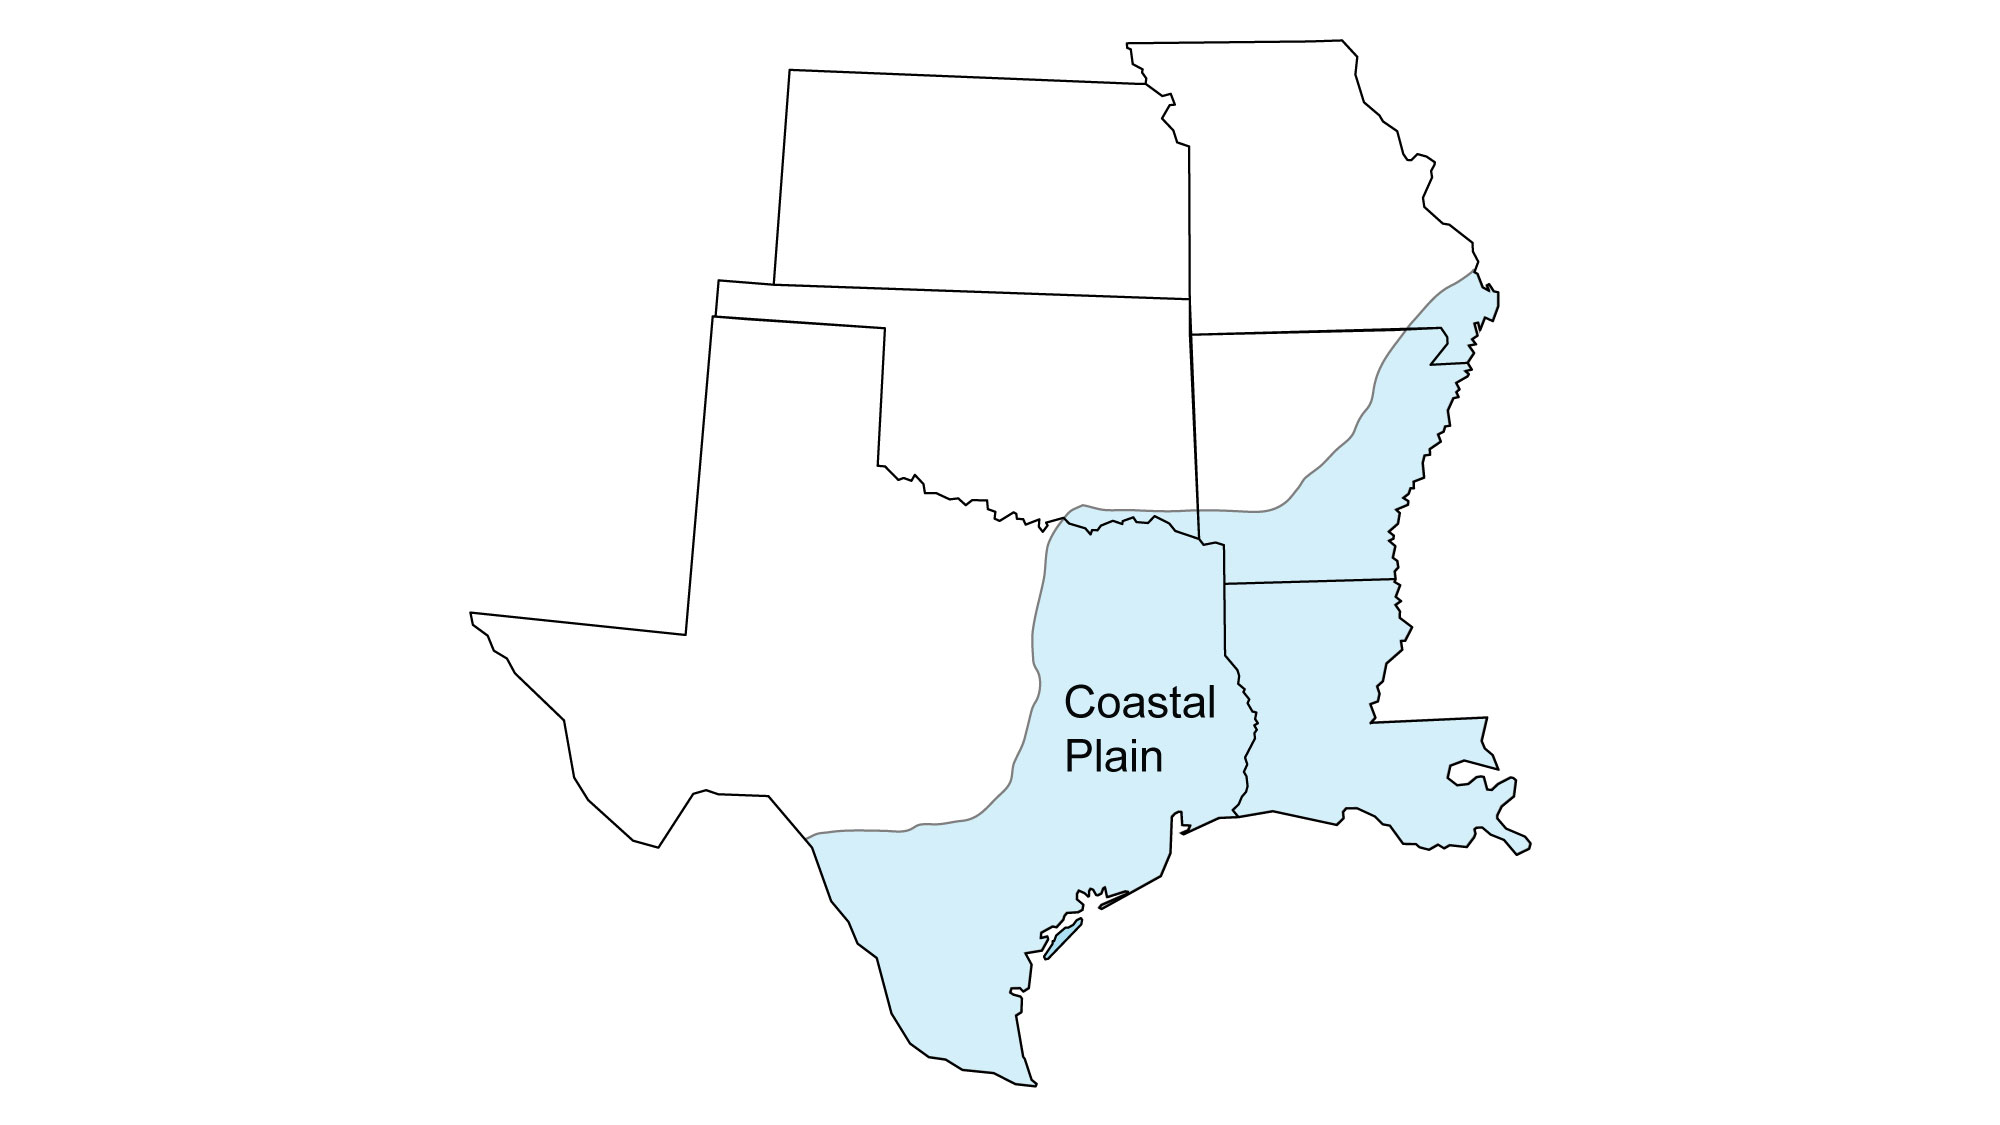 Simple map showing the Coastal Plain region of the South Central United States, including all of Louisiana, and portions of Texas, Oklahoma, Arkansas, and Missouri.